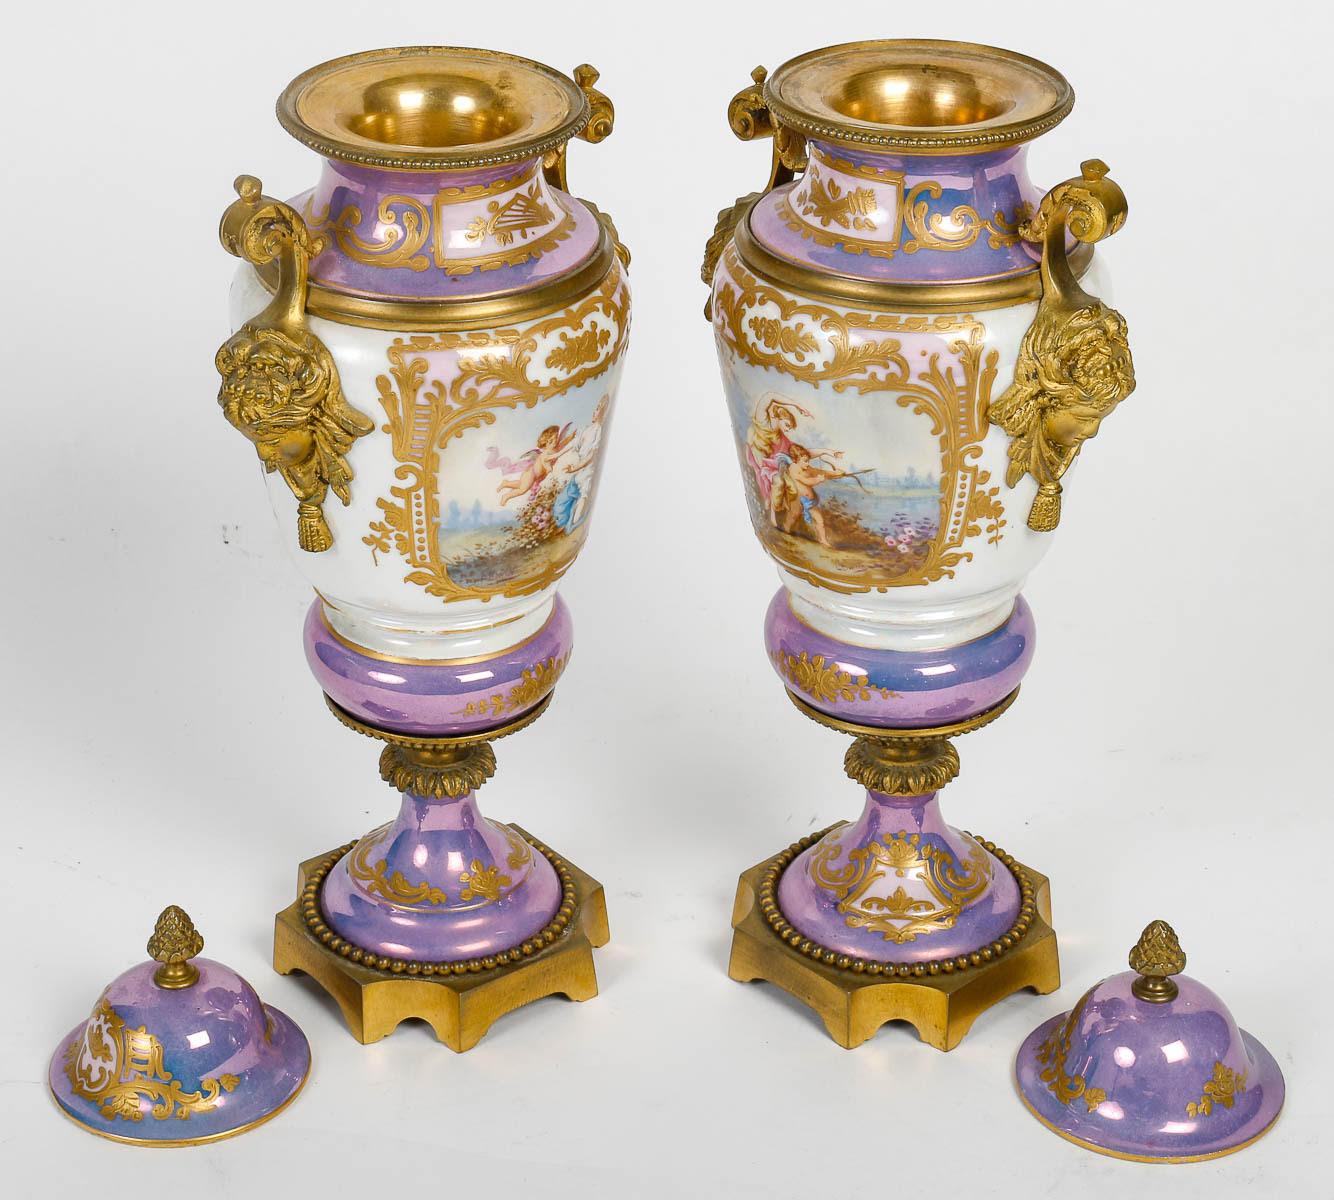 Pair of Iridescent Sèvres Porcelain and Gilt Bronze Covered Vases, 19th Century. 3